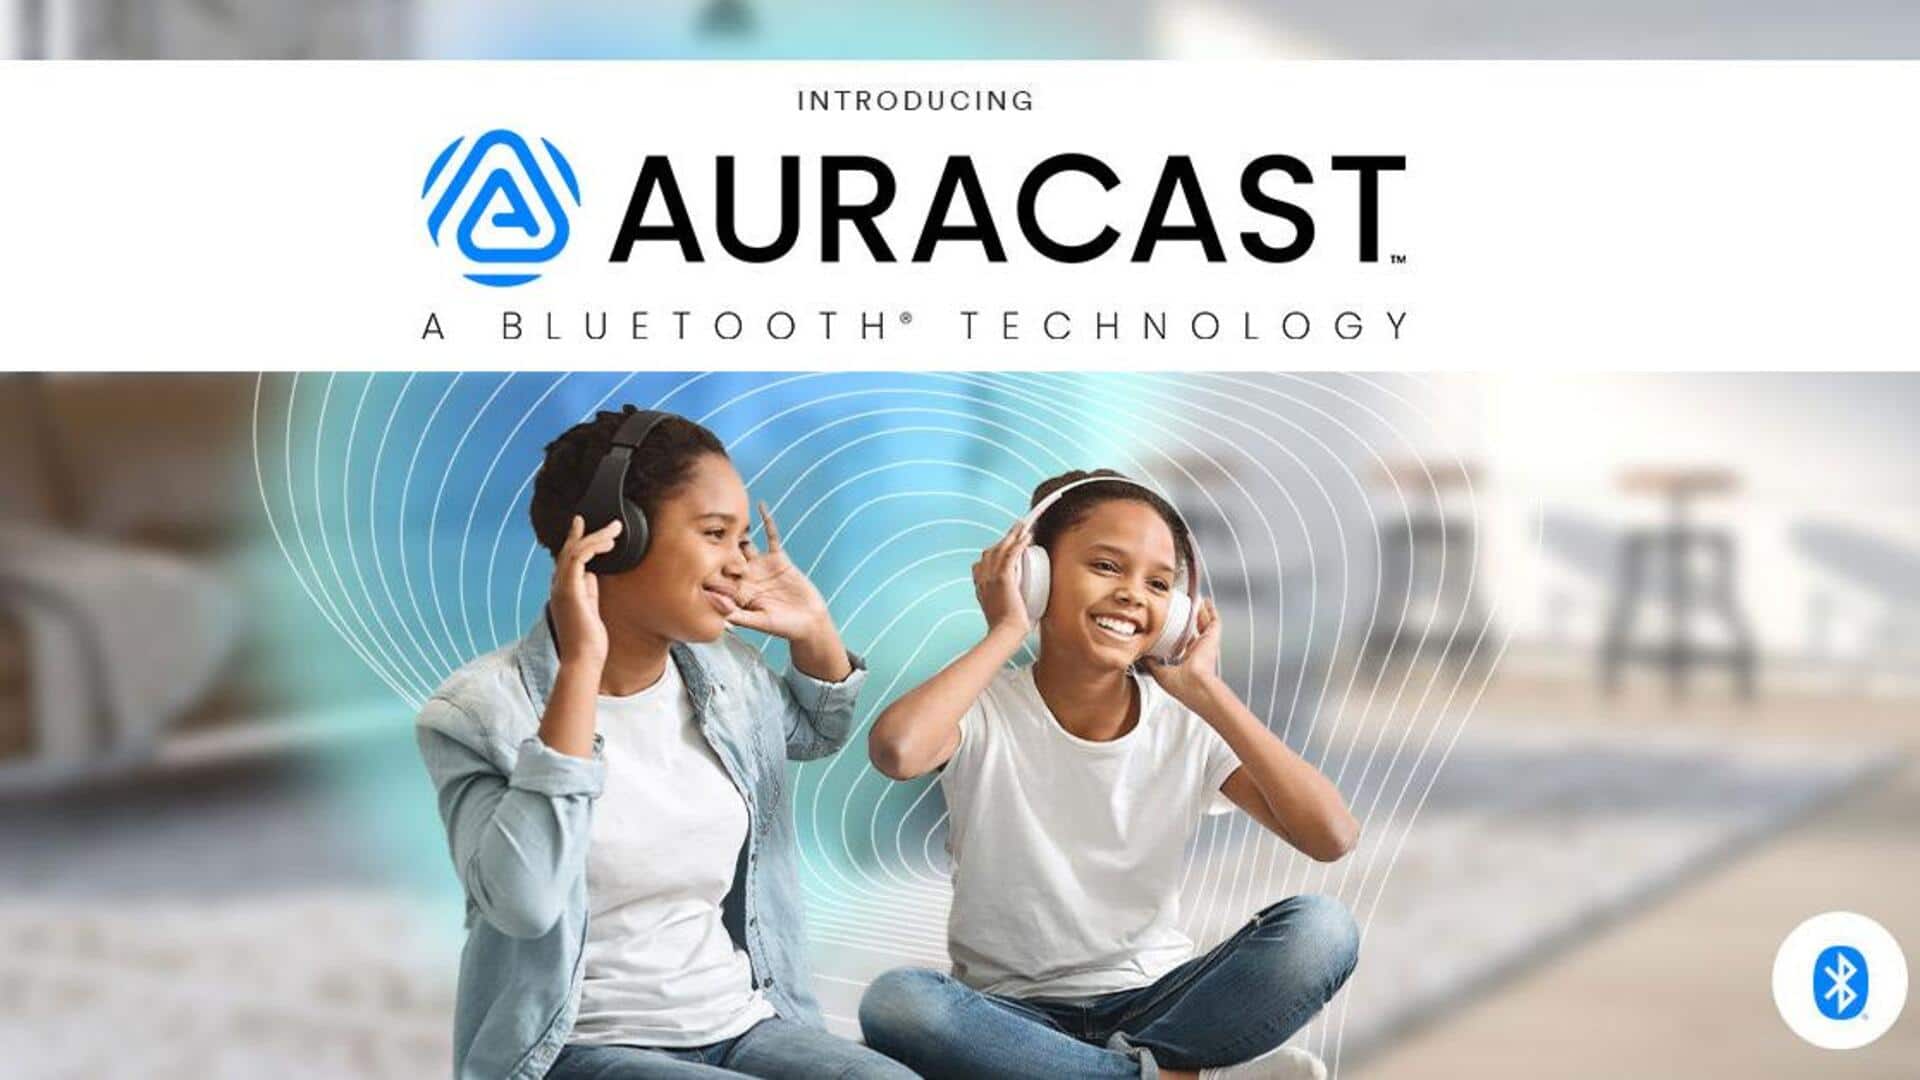 Auracast is the next big thing in Bluetooth technology